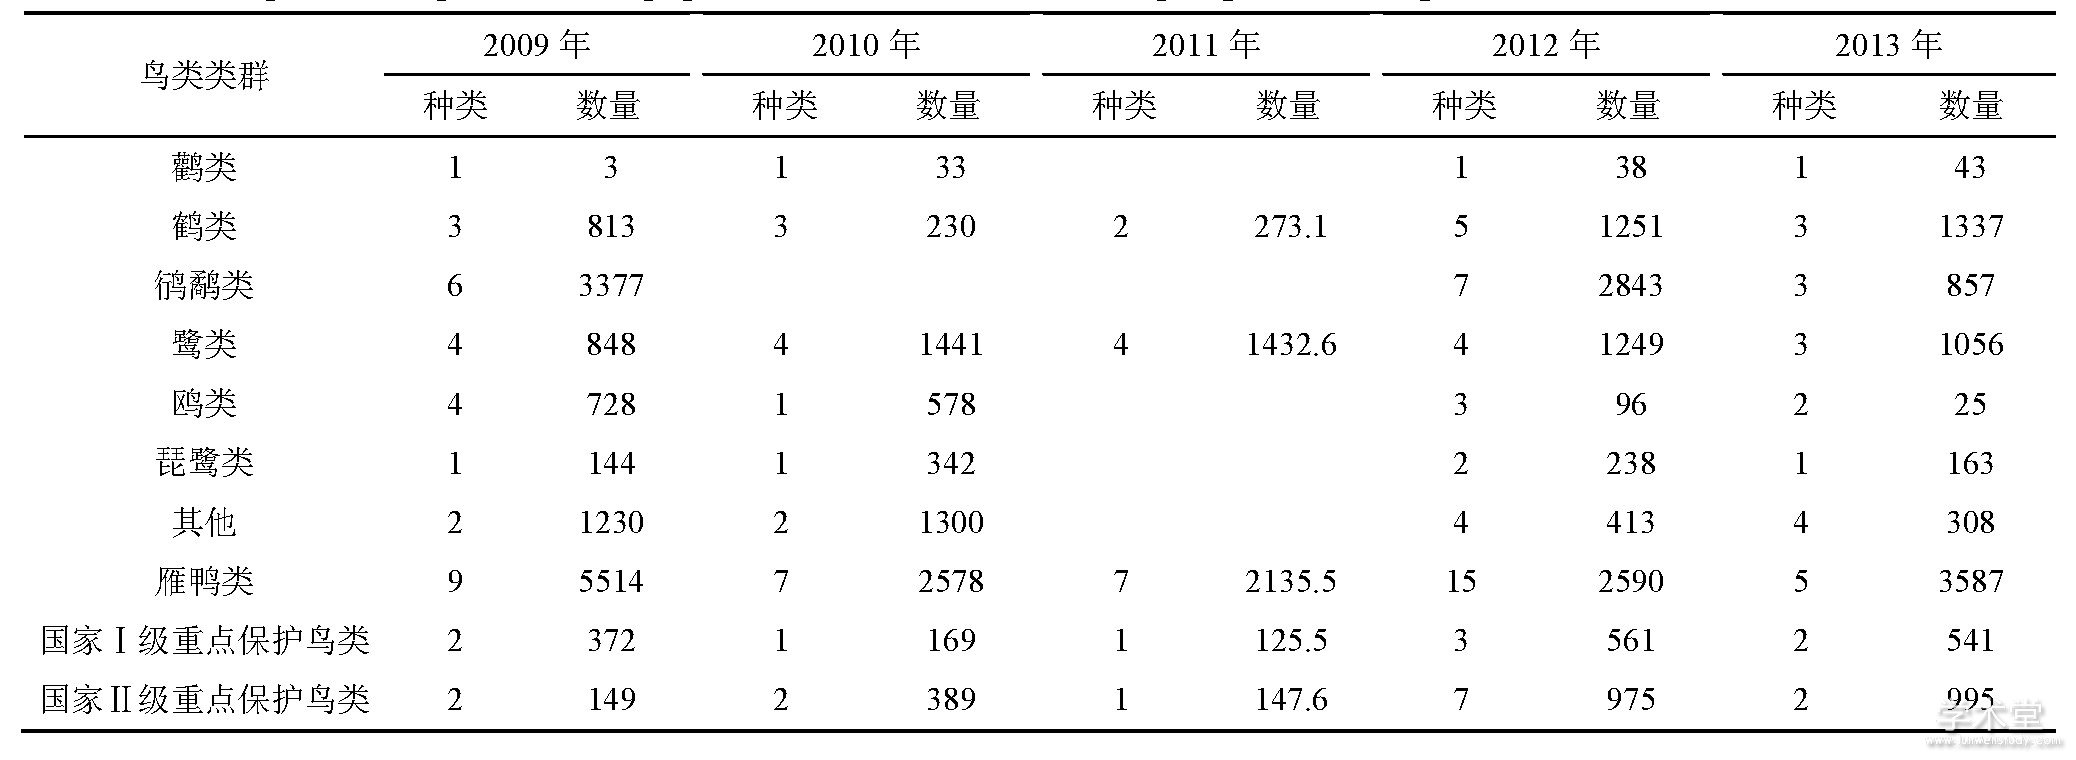 1 20092013ȡˮɼTable 1 The species composition and population of waterbirds in sampling area during 2009-2013